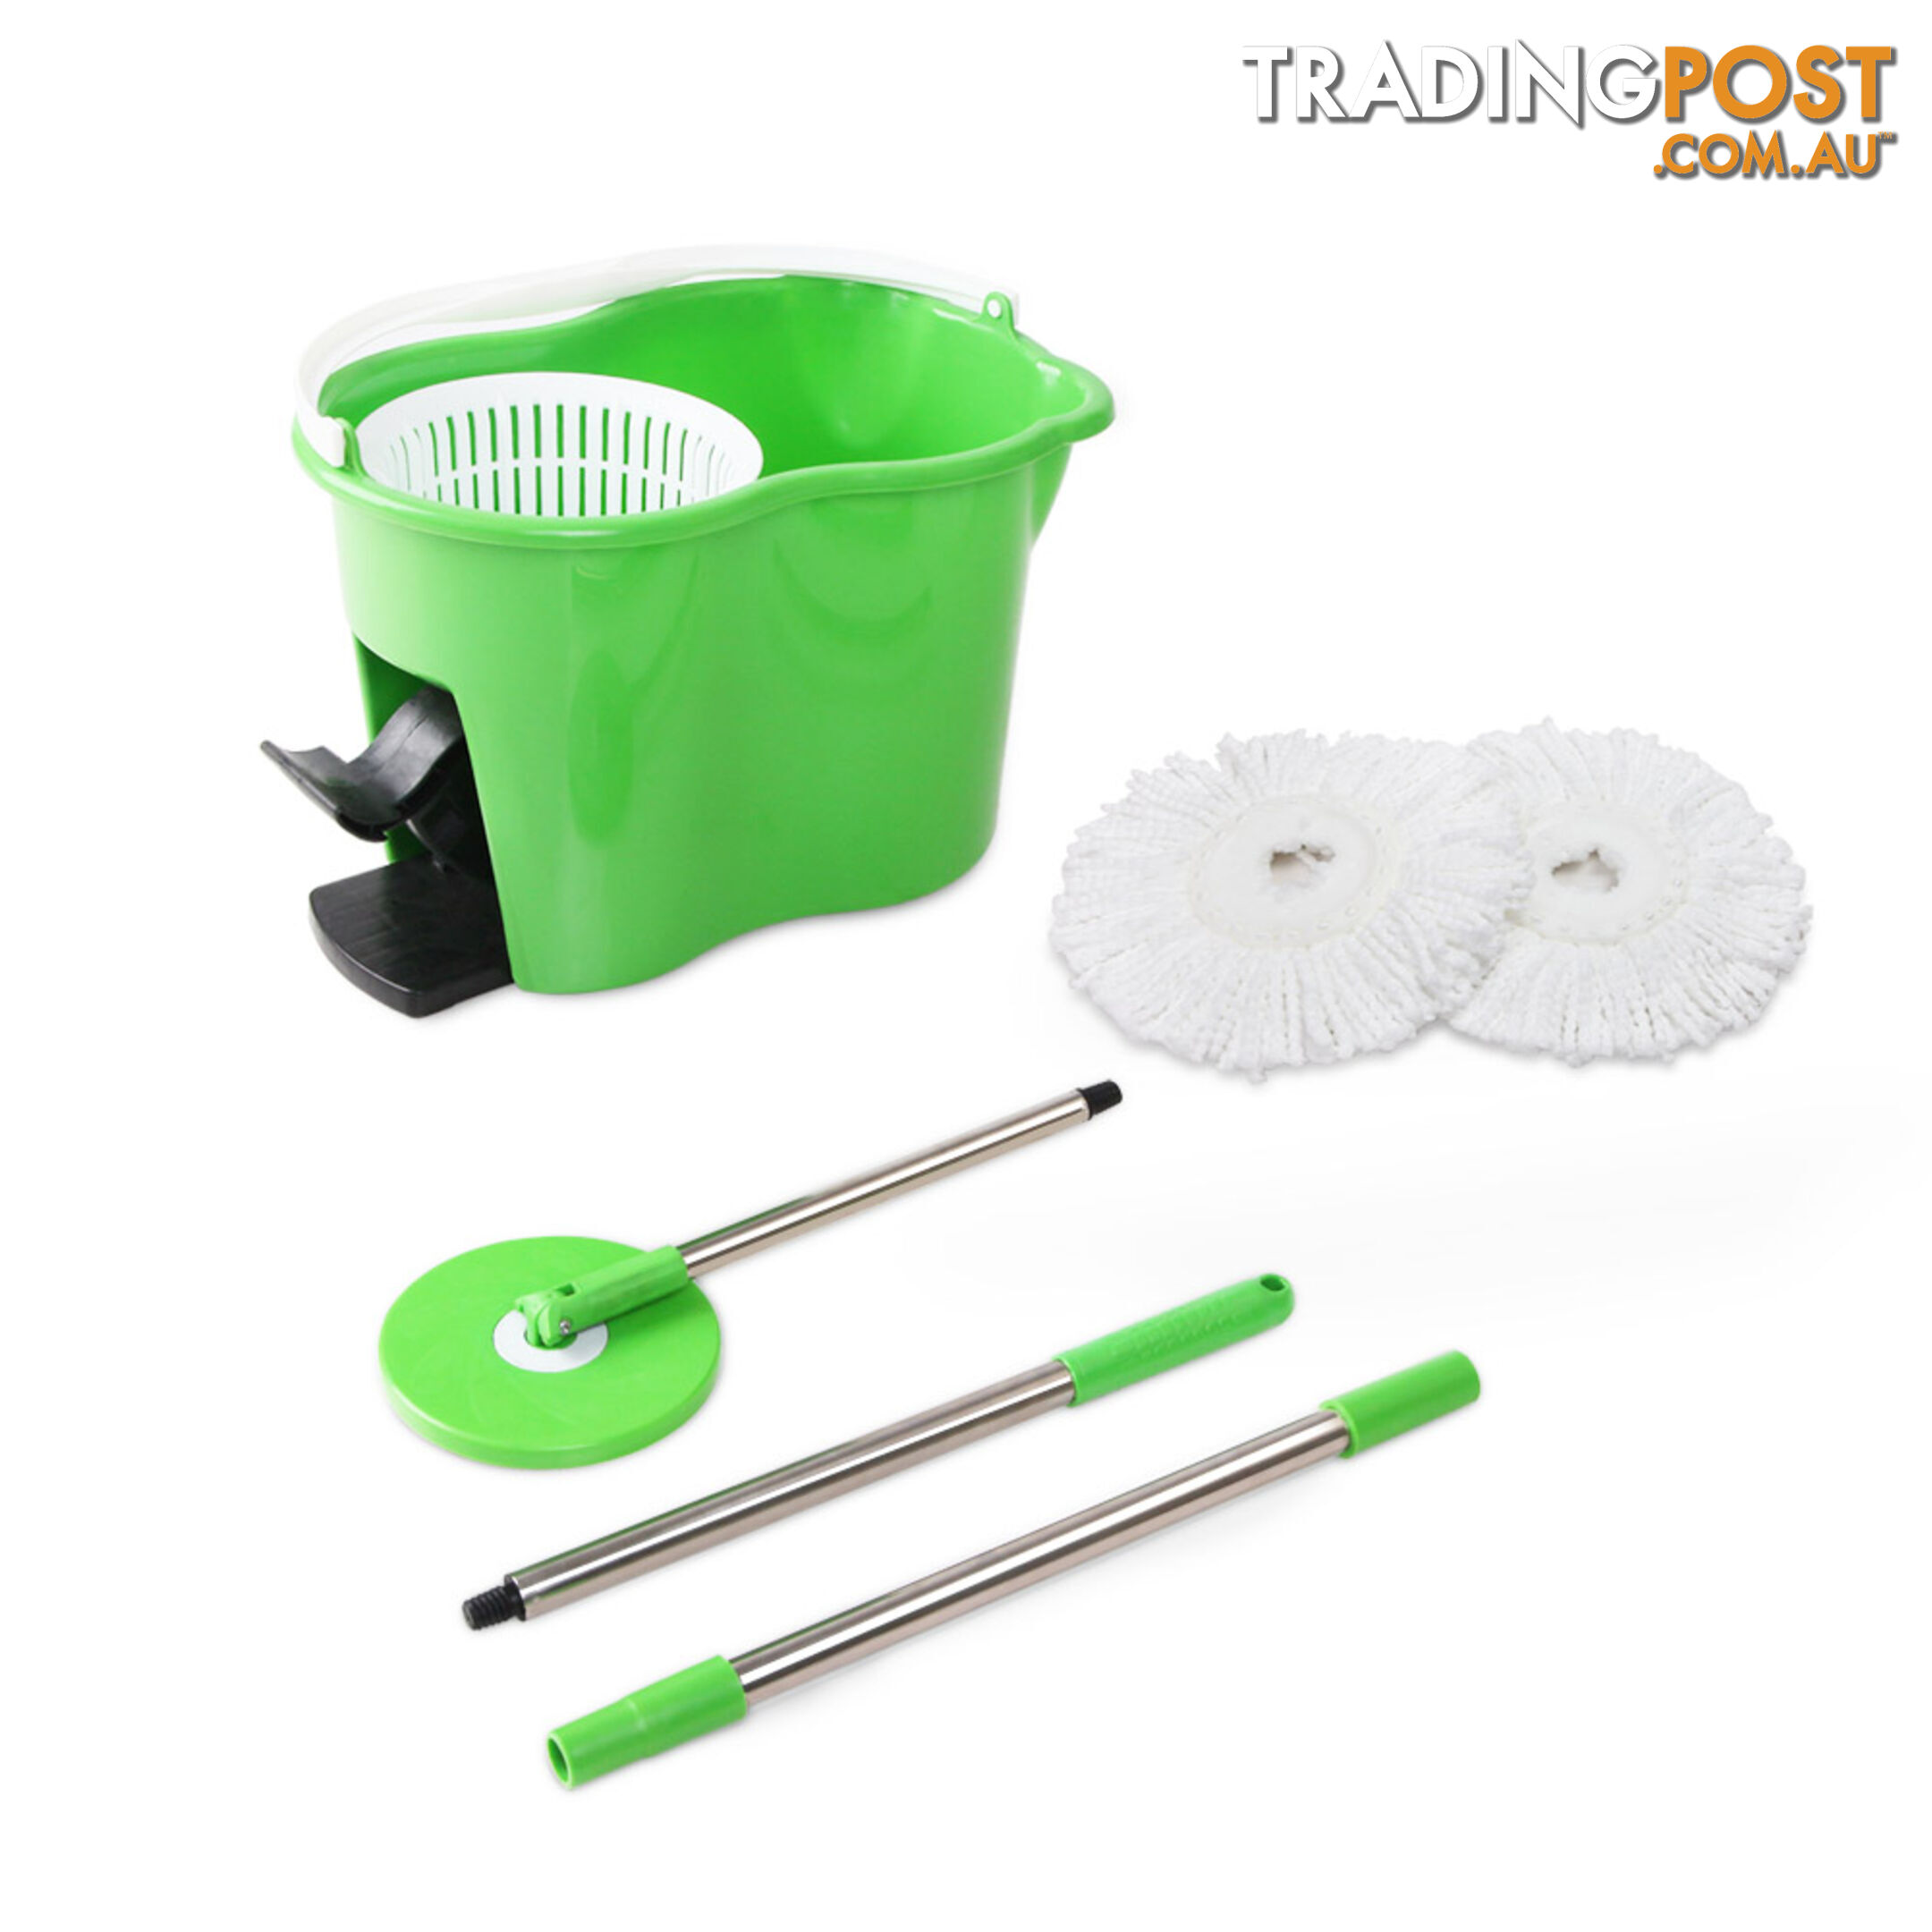 360 Degree Rotate Microfibre Spinning Mop 5L Spin Dry Bucket 2 Free Mop Heads GR